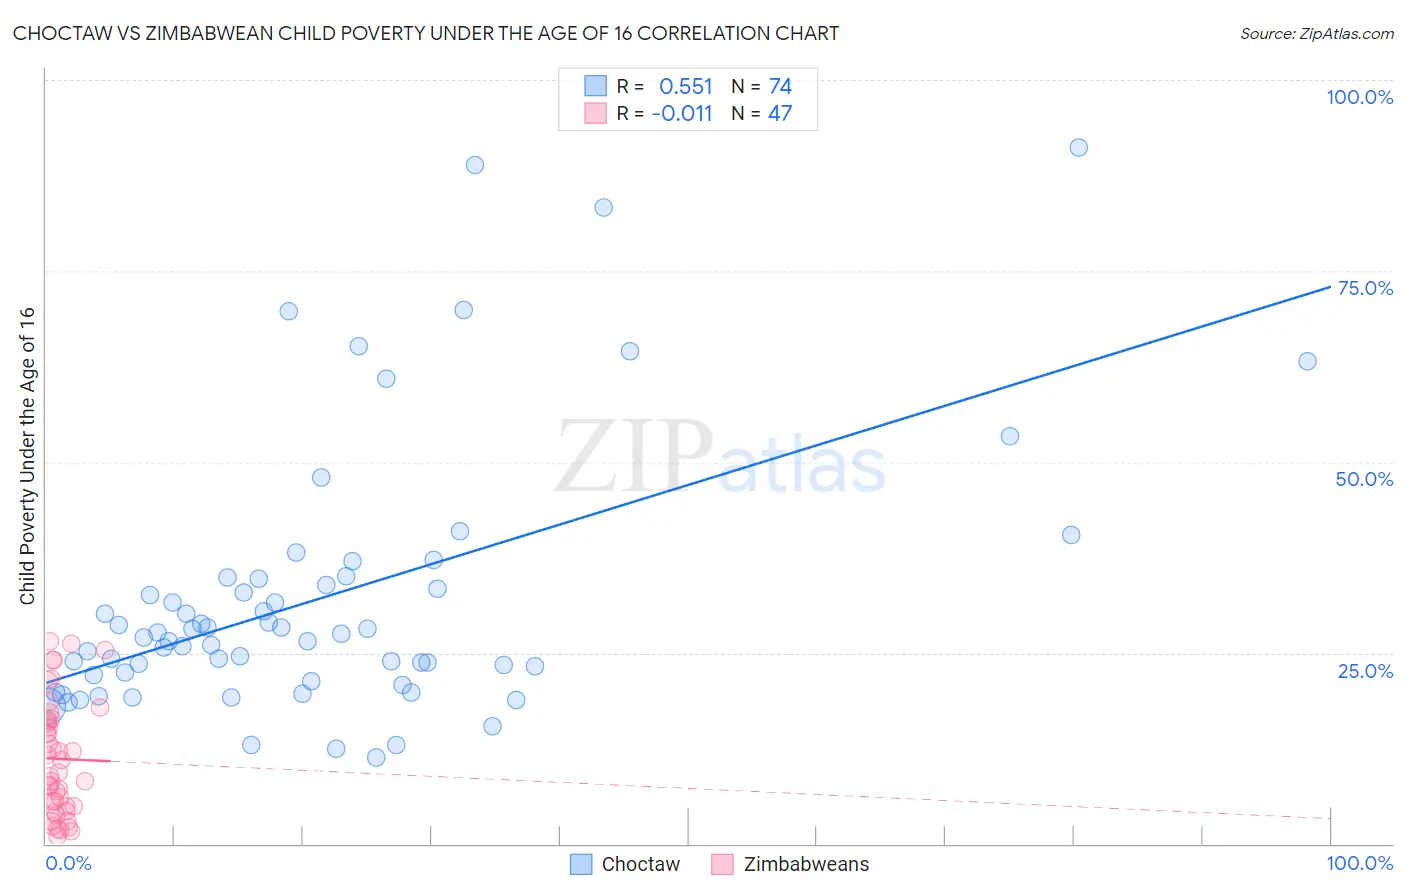 Choctaw vs Zimbabwean Child Poverty Under the Age of 16